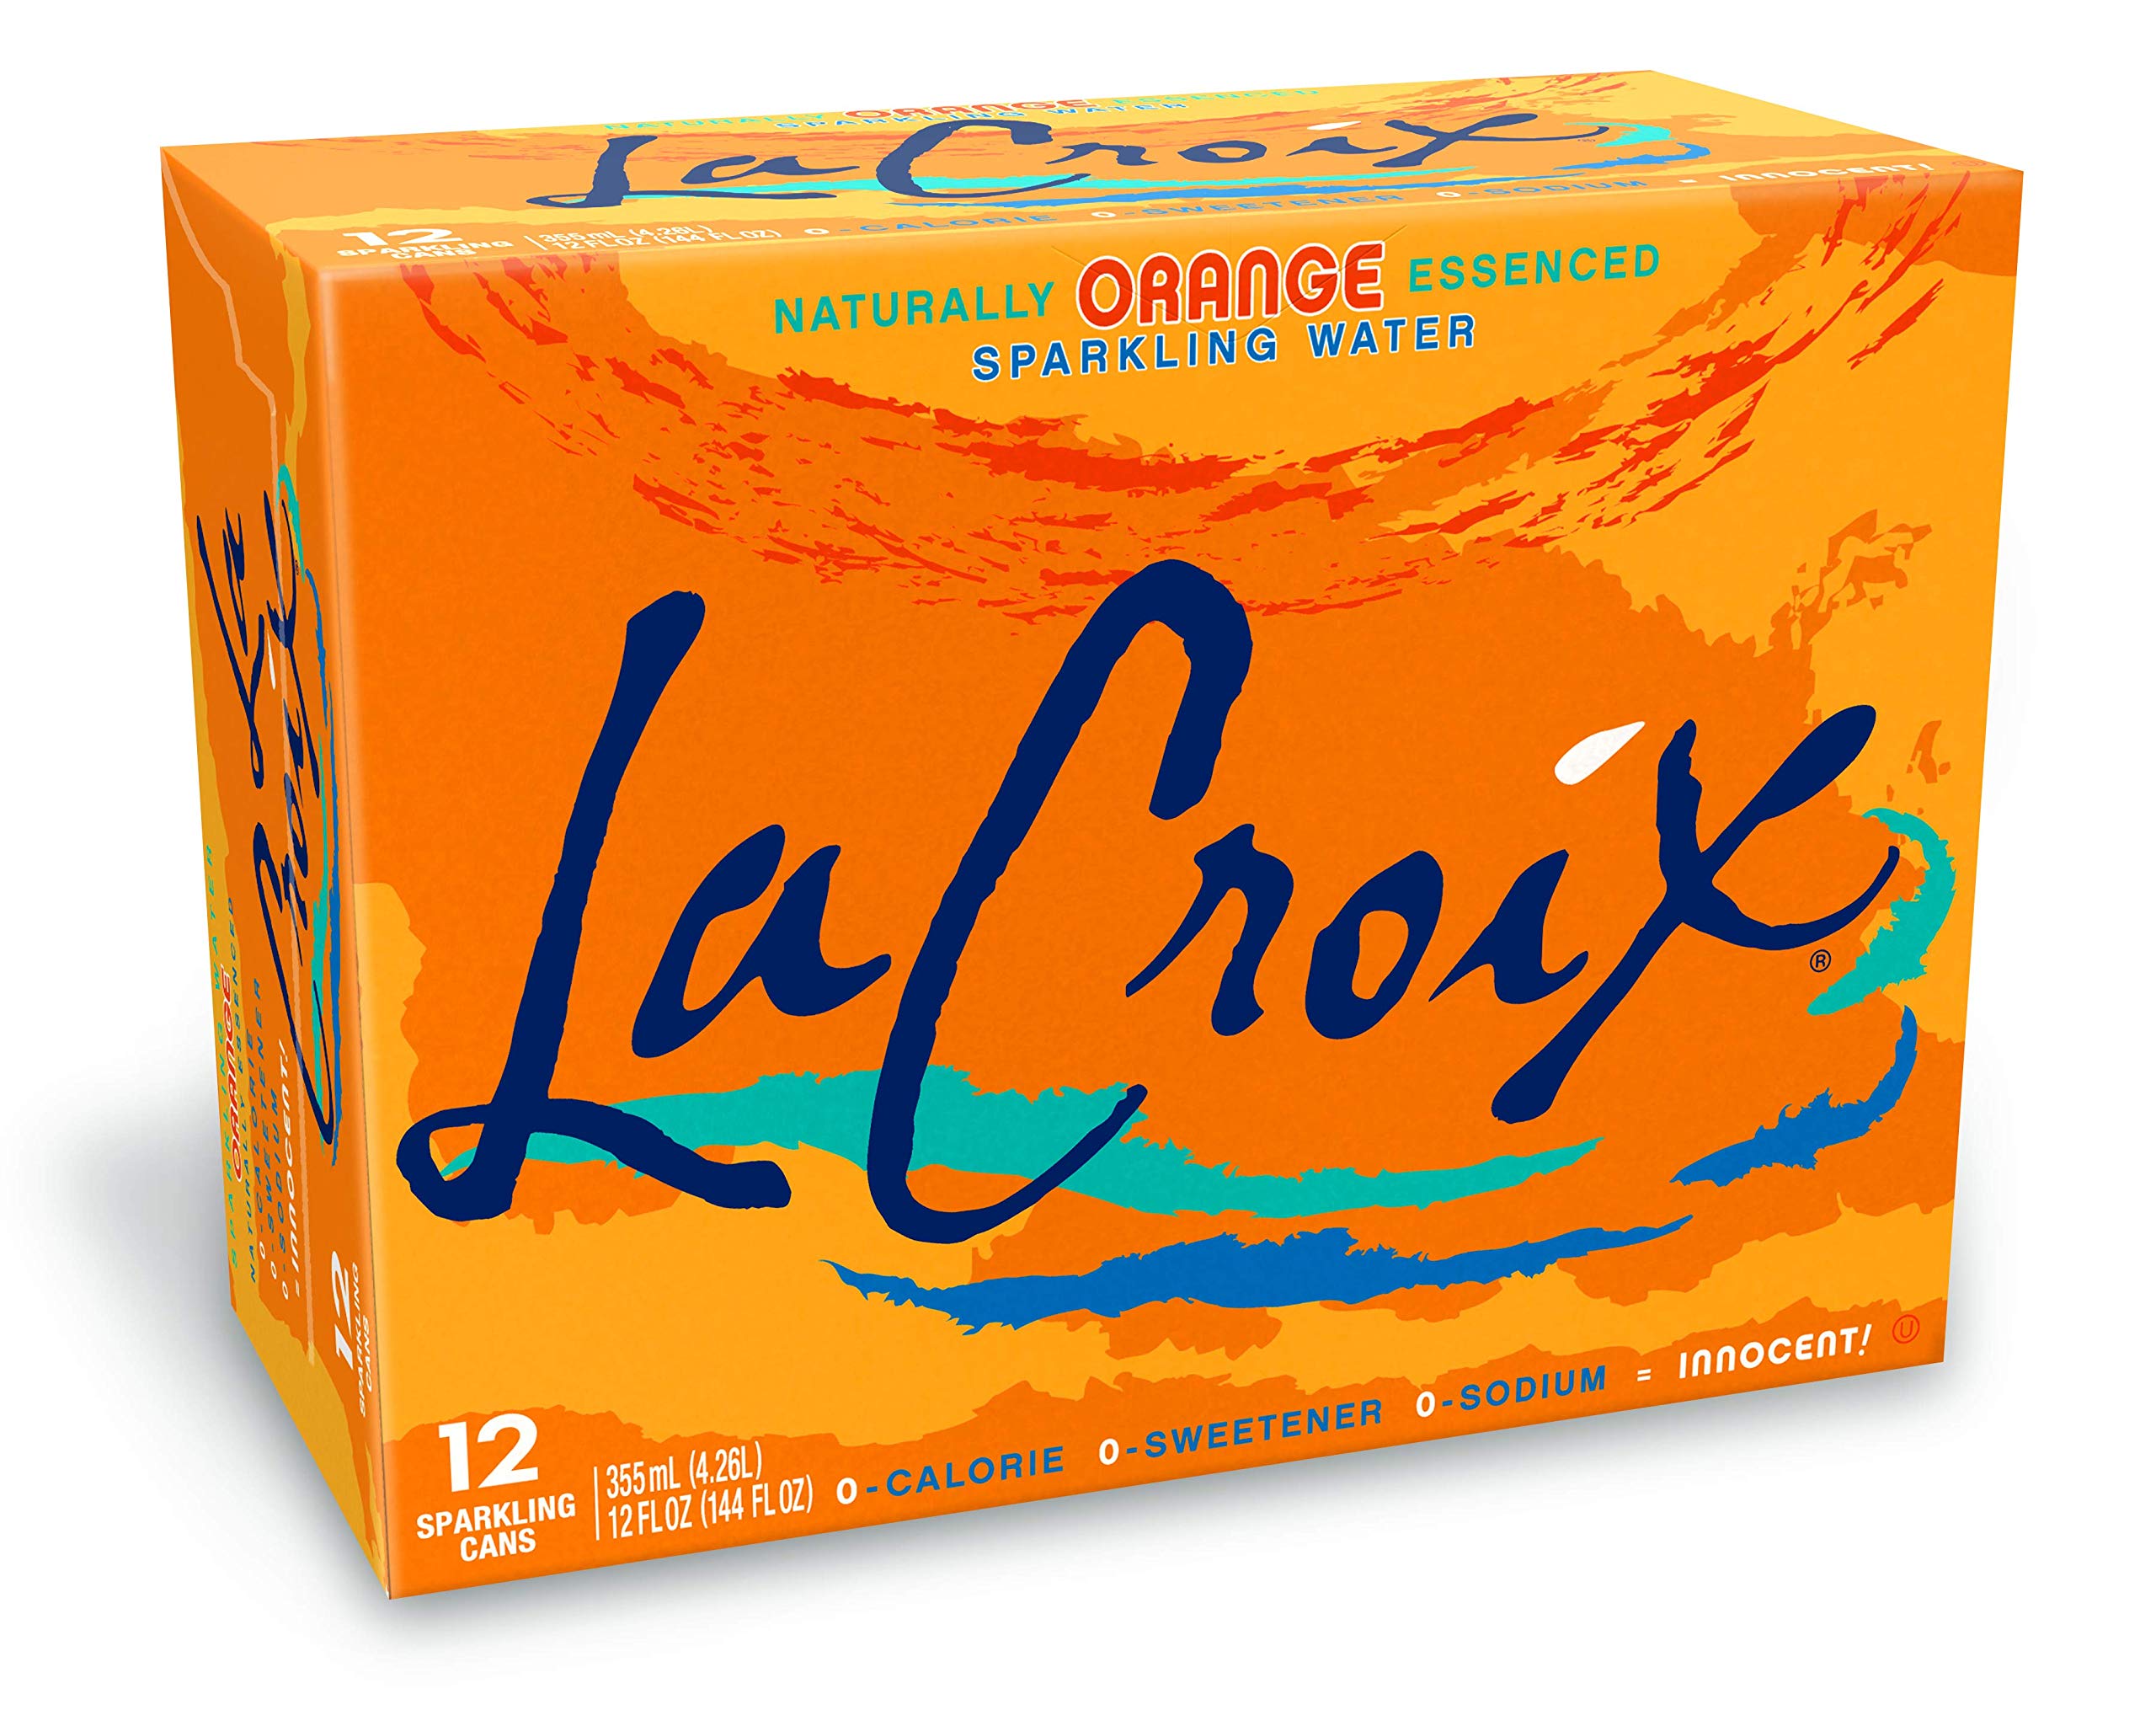 12-Pack 12-Oz LaCroix Naturally Sparkling Water (Orange) $3.60 + Free Shipping w/ Prime or on $35+